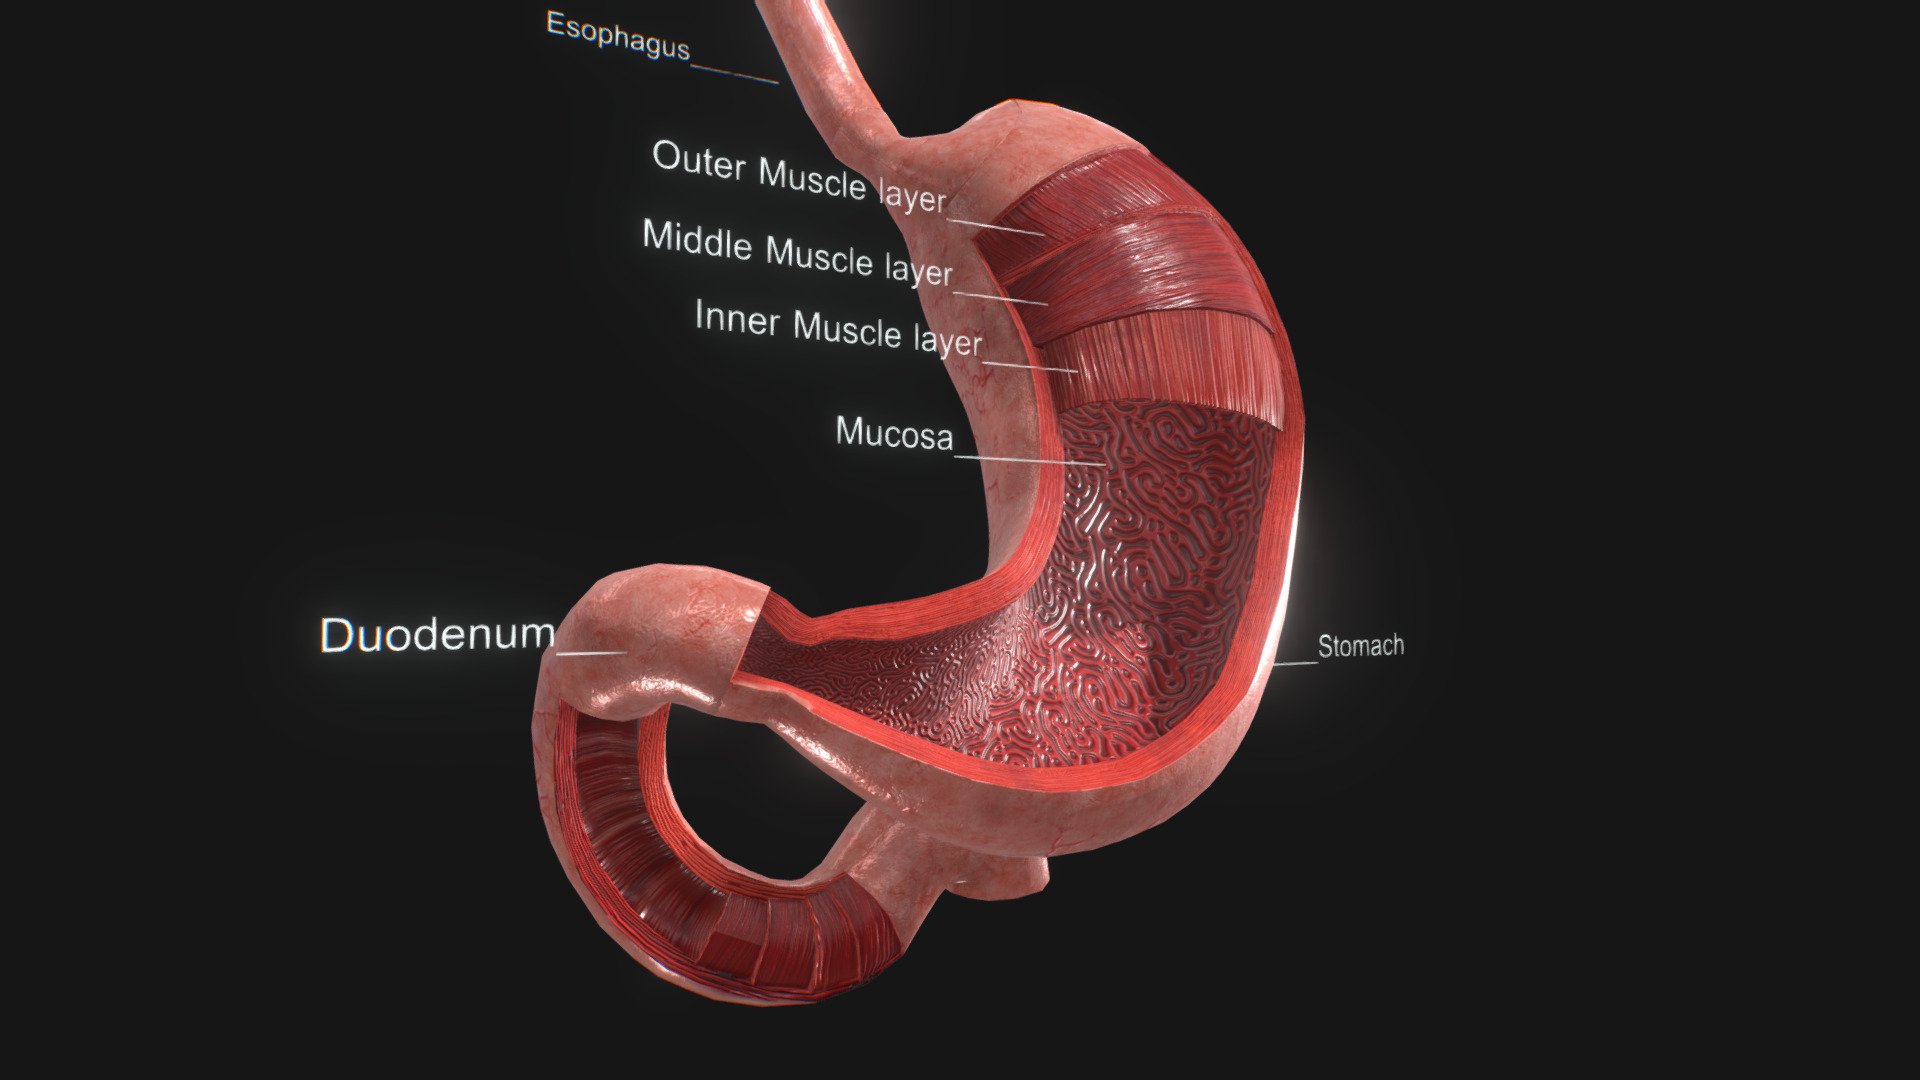 Stomach with anatomic cut

Features:




No errors or missing files

High-quality polygonal model

No N-GONS Faces

This model is created in polygon quad &amp; tri with good edge flow, So you can edit and change it according to your requirements.

correctly scaled accurate representation of the original object.

If Neccesory HDR Light Map is included.

PBR textures are included.

Objects are grouped and named

The scene is well arranged (proper layer and group)

Objects, materials, and textures are named.

Poly Details:

Units in all formats: centimeters 
(X=11 cm Y=7 cm Z=13 cm) Polys counts: 9650 Vertices counts: 9714

Formats:

3Ds Max 2014 _V-Ray
3Ds Max 2014 _Scanline
Maya 2016_V-Ray
Cinema 4D R20 _Standard
FBX_with Textures
OBJ_with Textures
3Ds

Textures:

Stomach x 8.png **** 4096x4096

[Diffuse, Base color, Normal, Specular, Glossiness, Roughness, AO, Metallic ] - Stomach Anatomy 3D - Buy Royalty Free 3D model by 3D4SCI 3d model